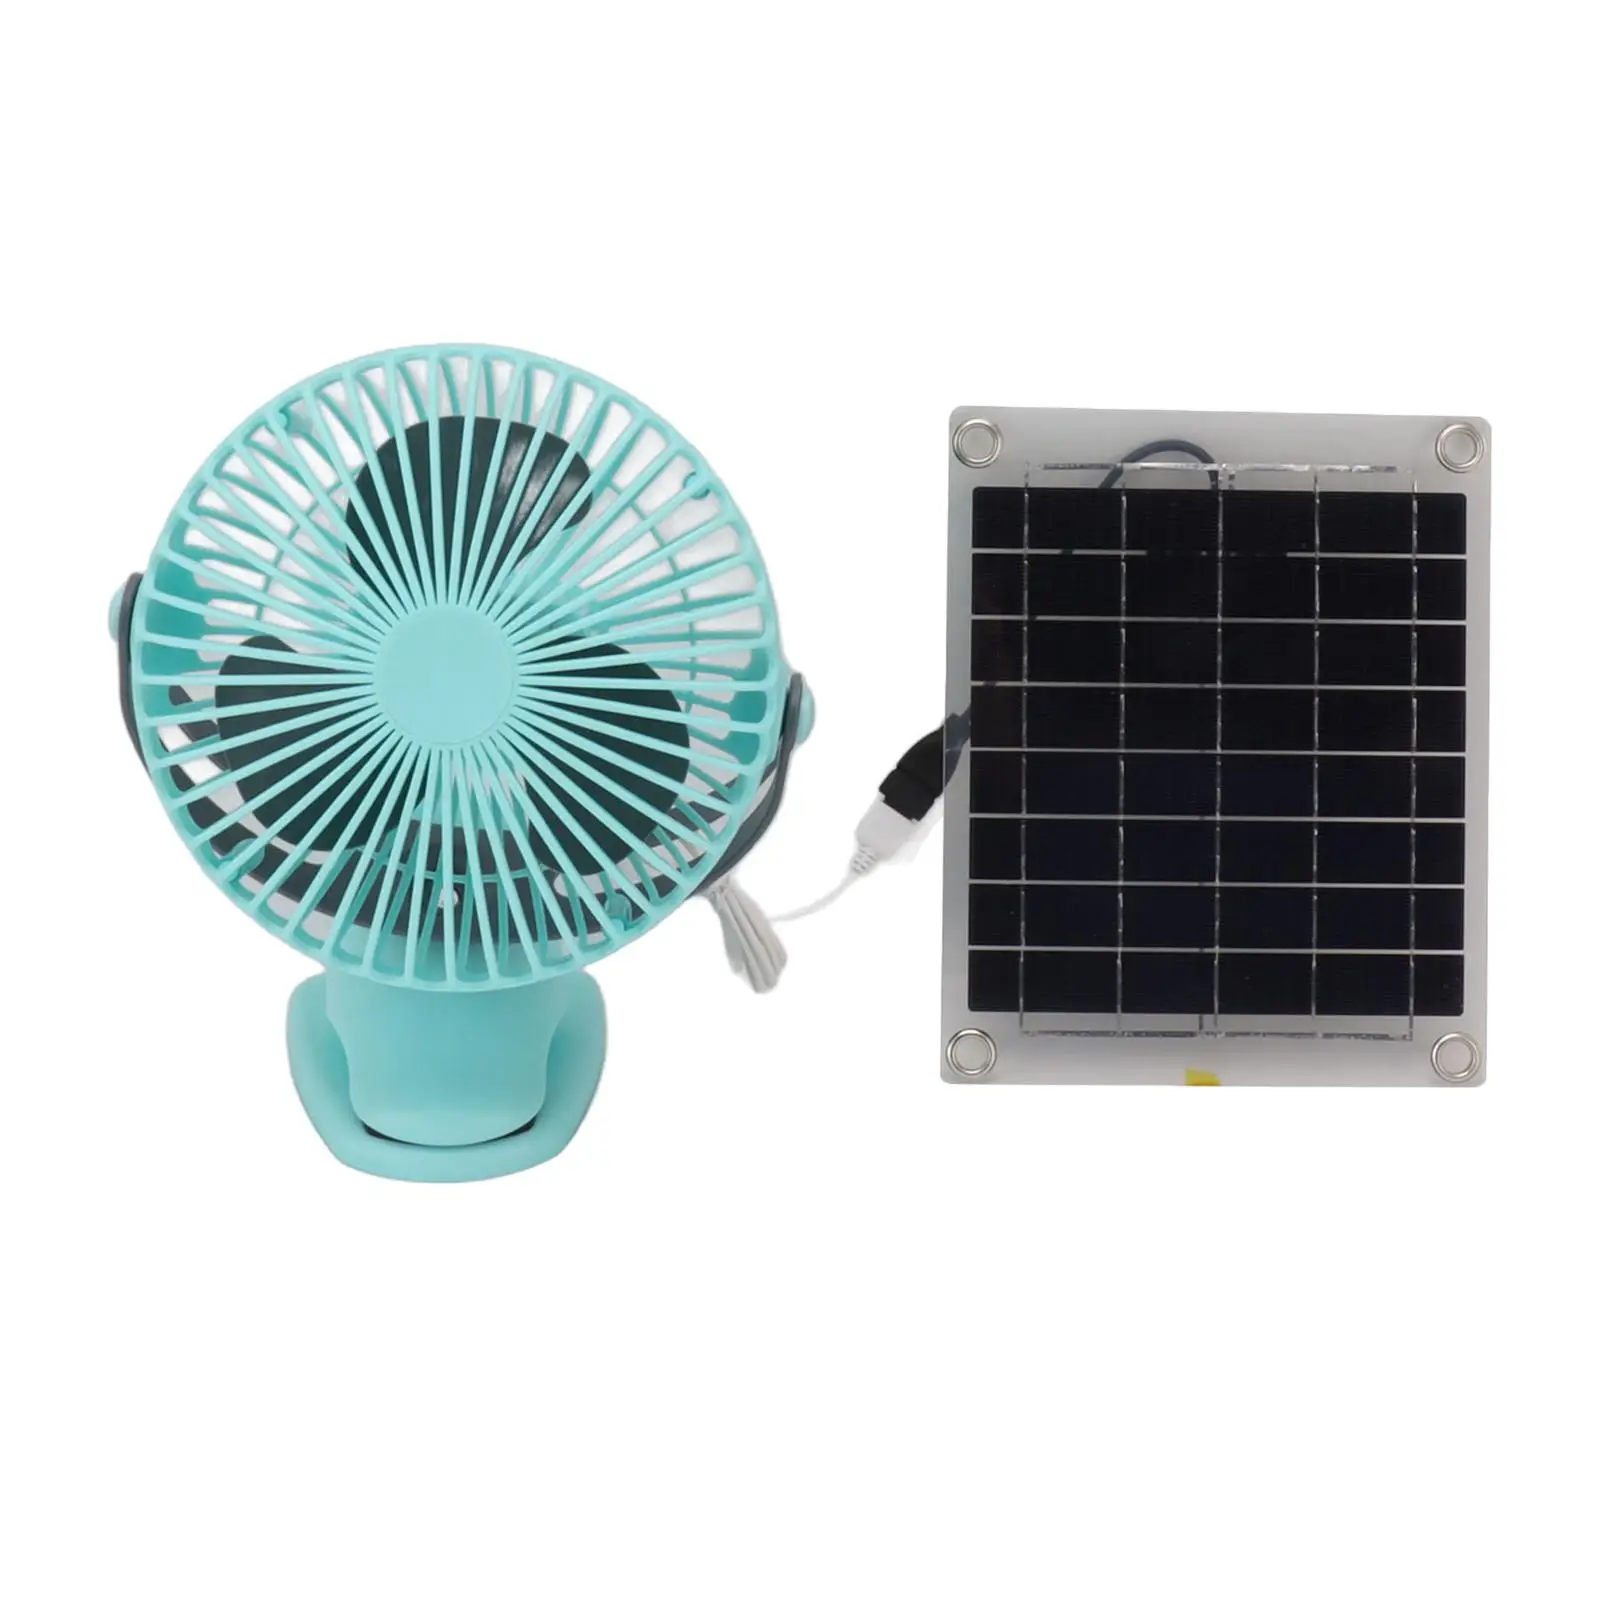 Personal Desk Fan Camping Fan with Solar Panel for Tent Picnic Office